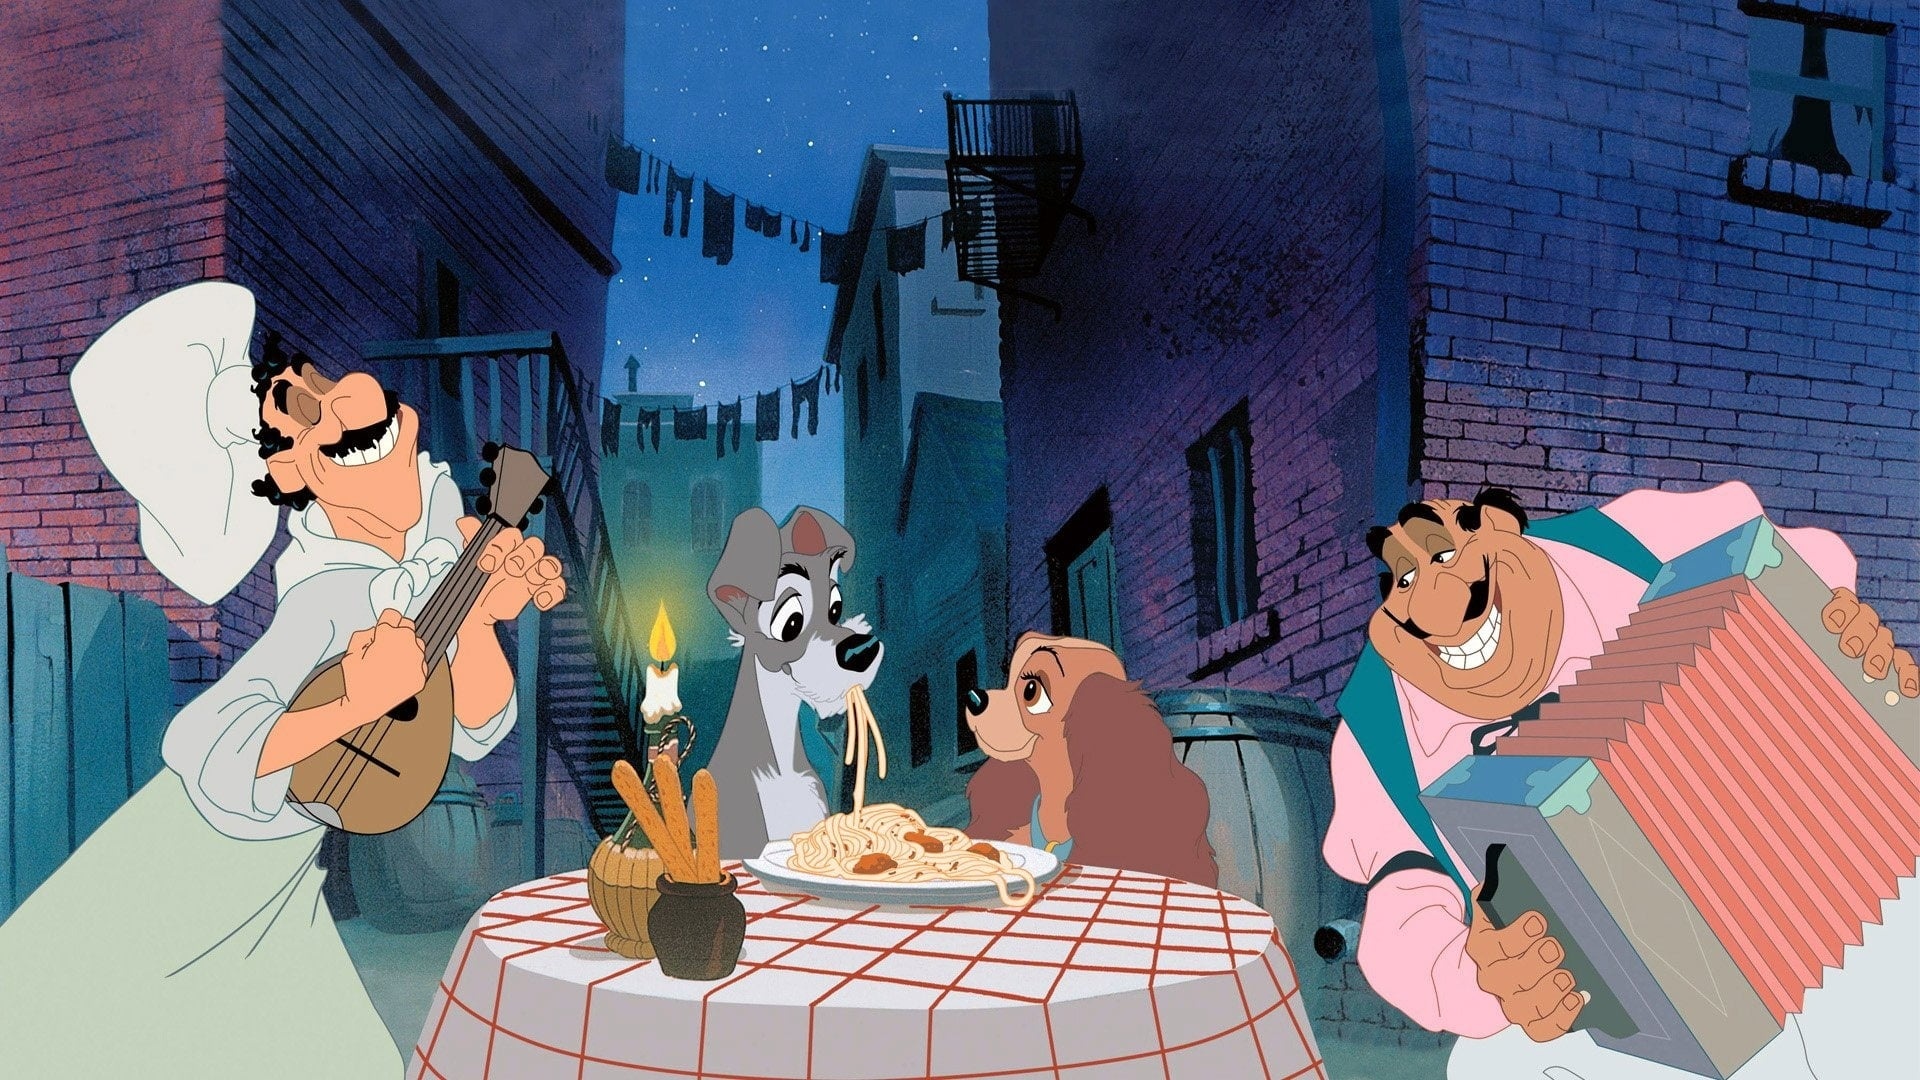 Lady and the Tramp, Vintage backdrops, Charming animation, Disney classic, 1920x1080 Full HD Desktop